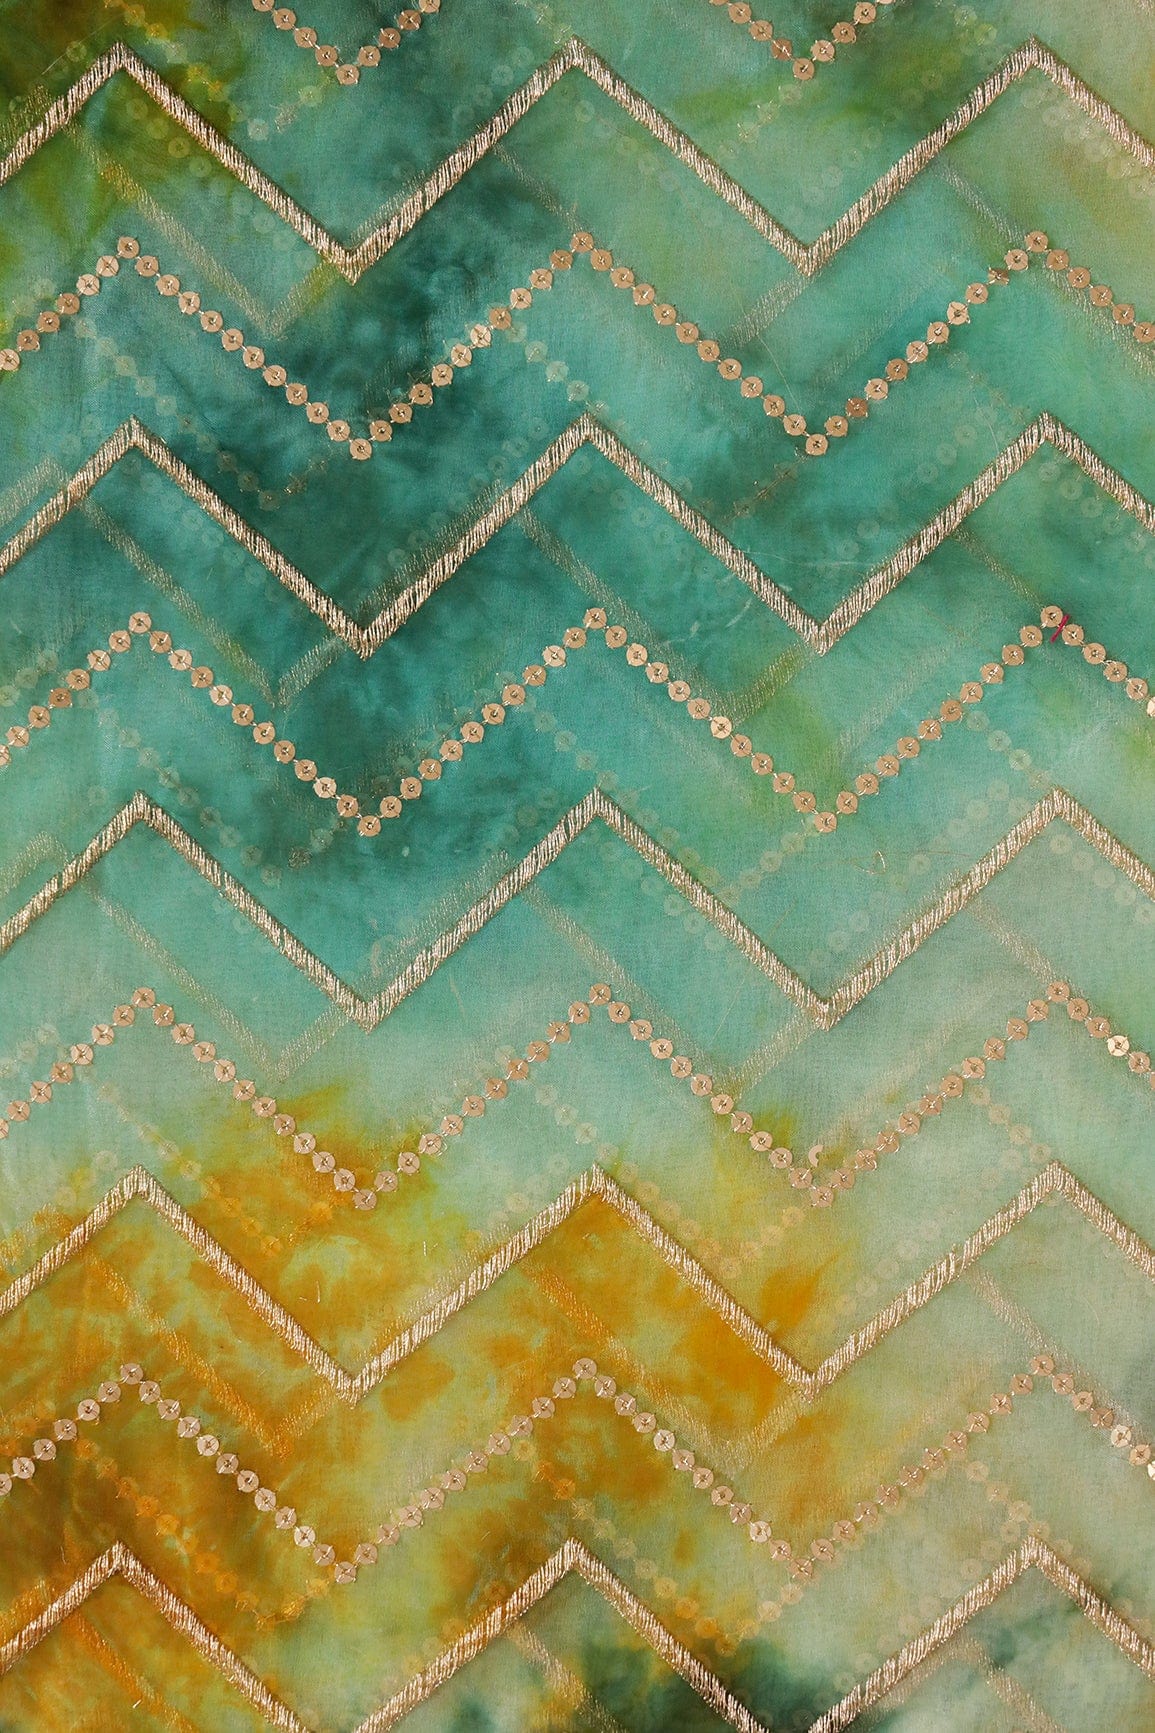 doeraa Embroidery Fabrics Gold Zari With Gold Sequins Chevron Embroidery Work On Tie & Dye Teal And Green Organza Fabric